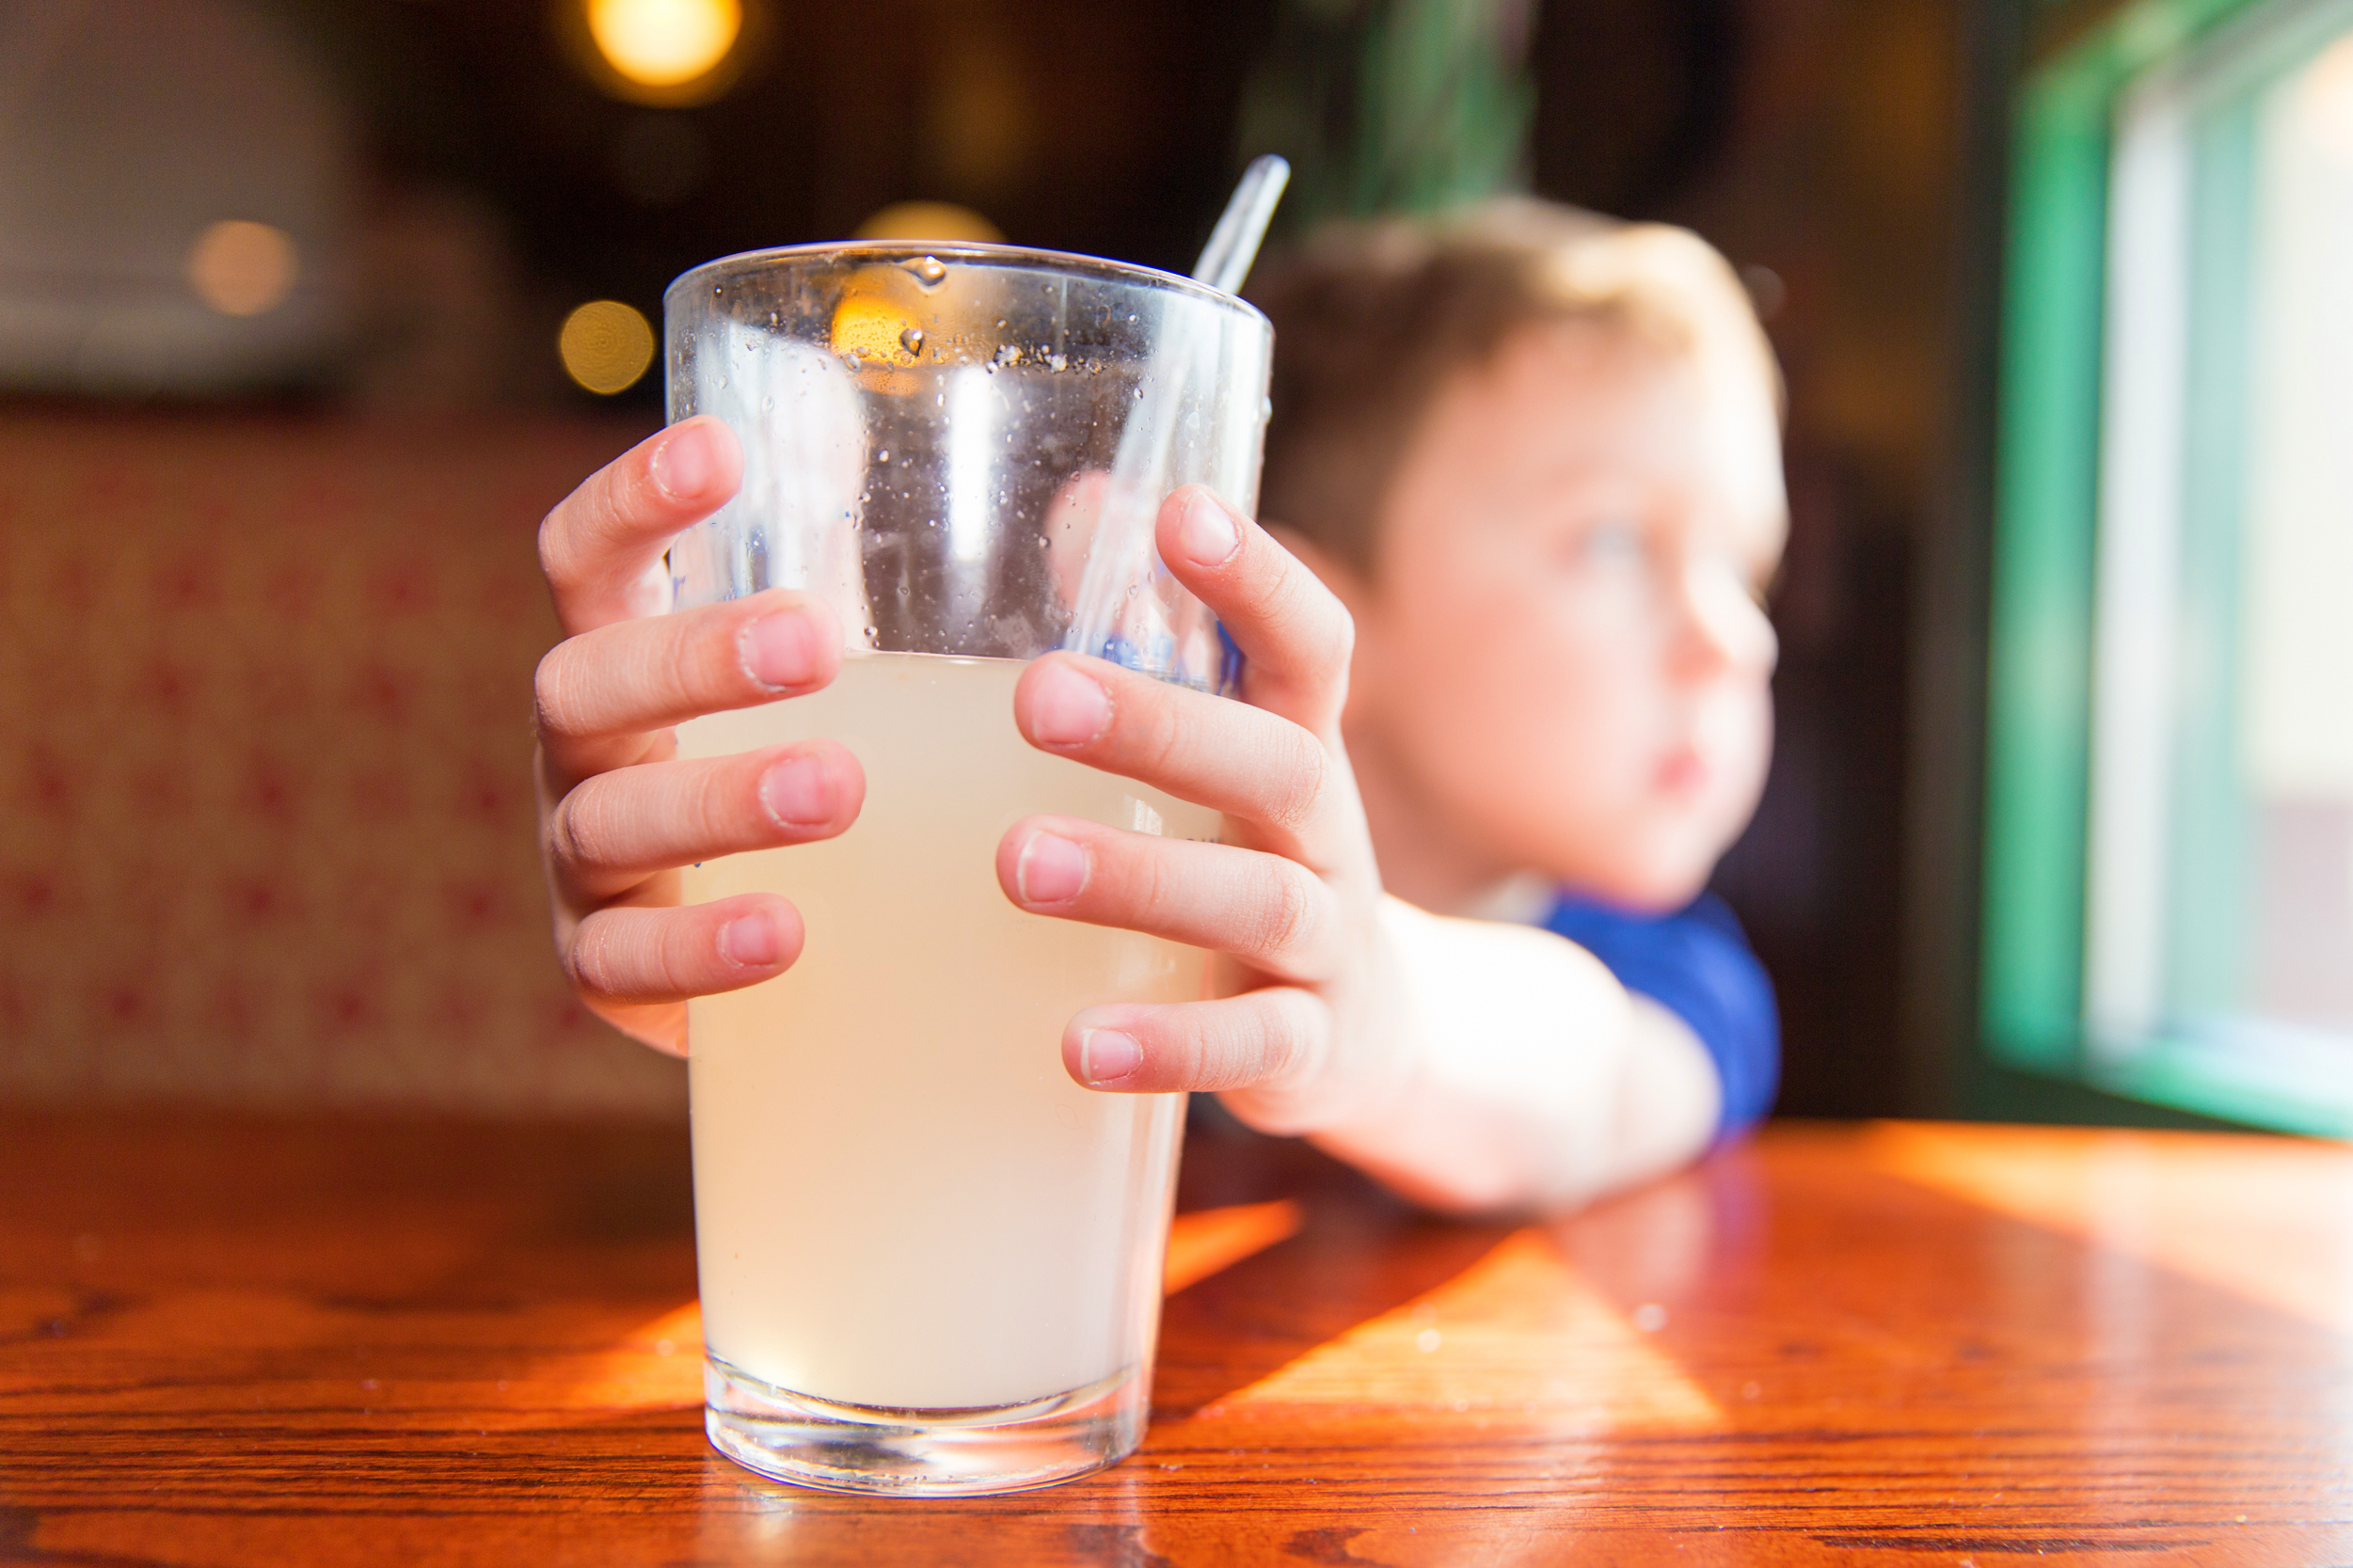 Childhood obesity concept: a young boy grips a glass filled with juice while sitting at a table and staring out the window.